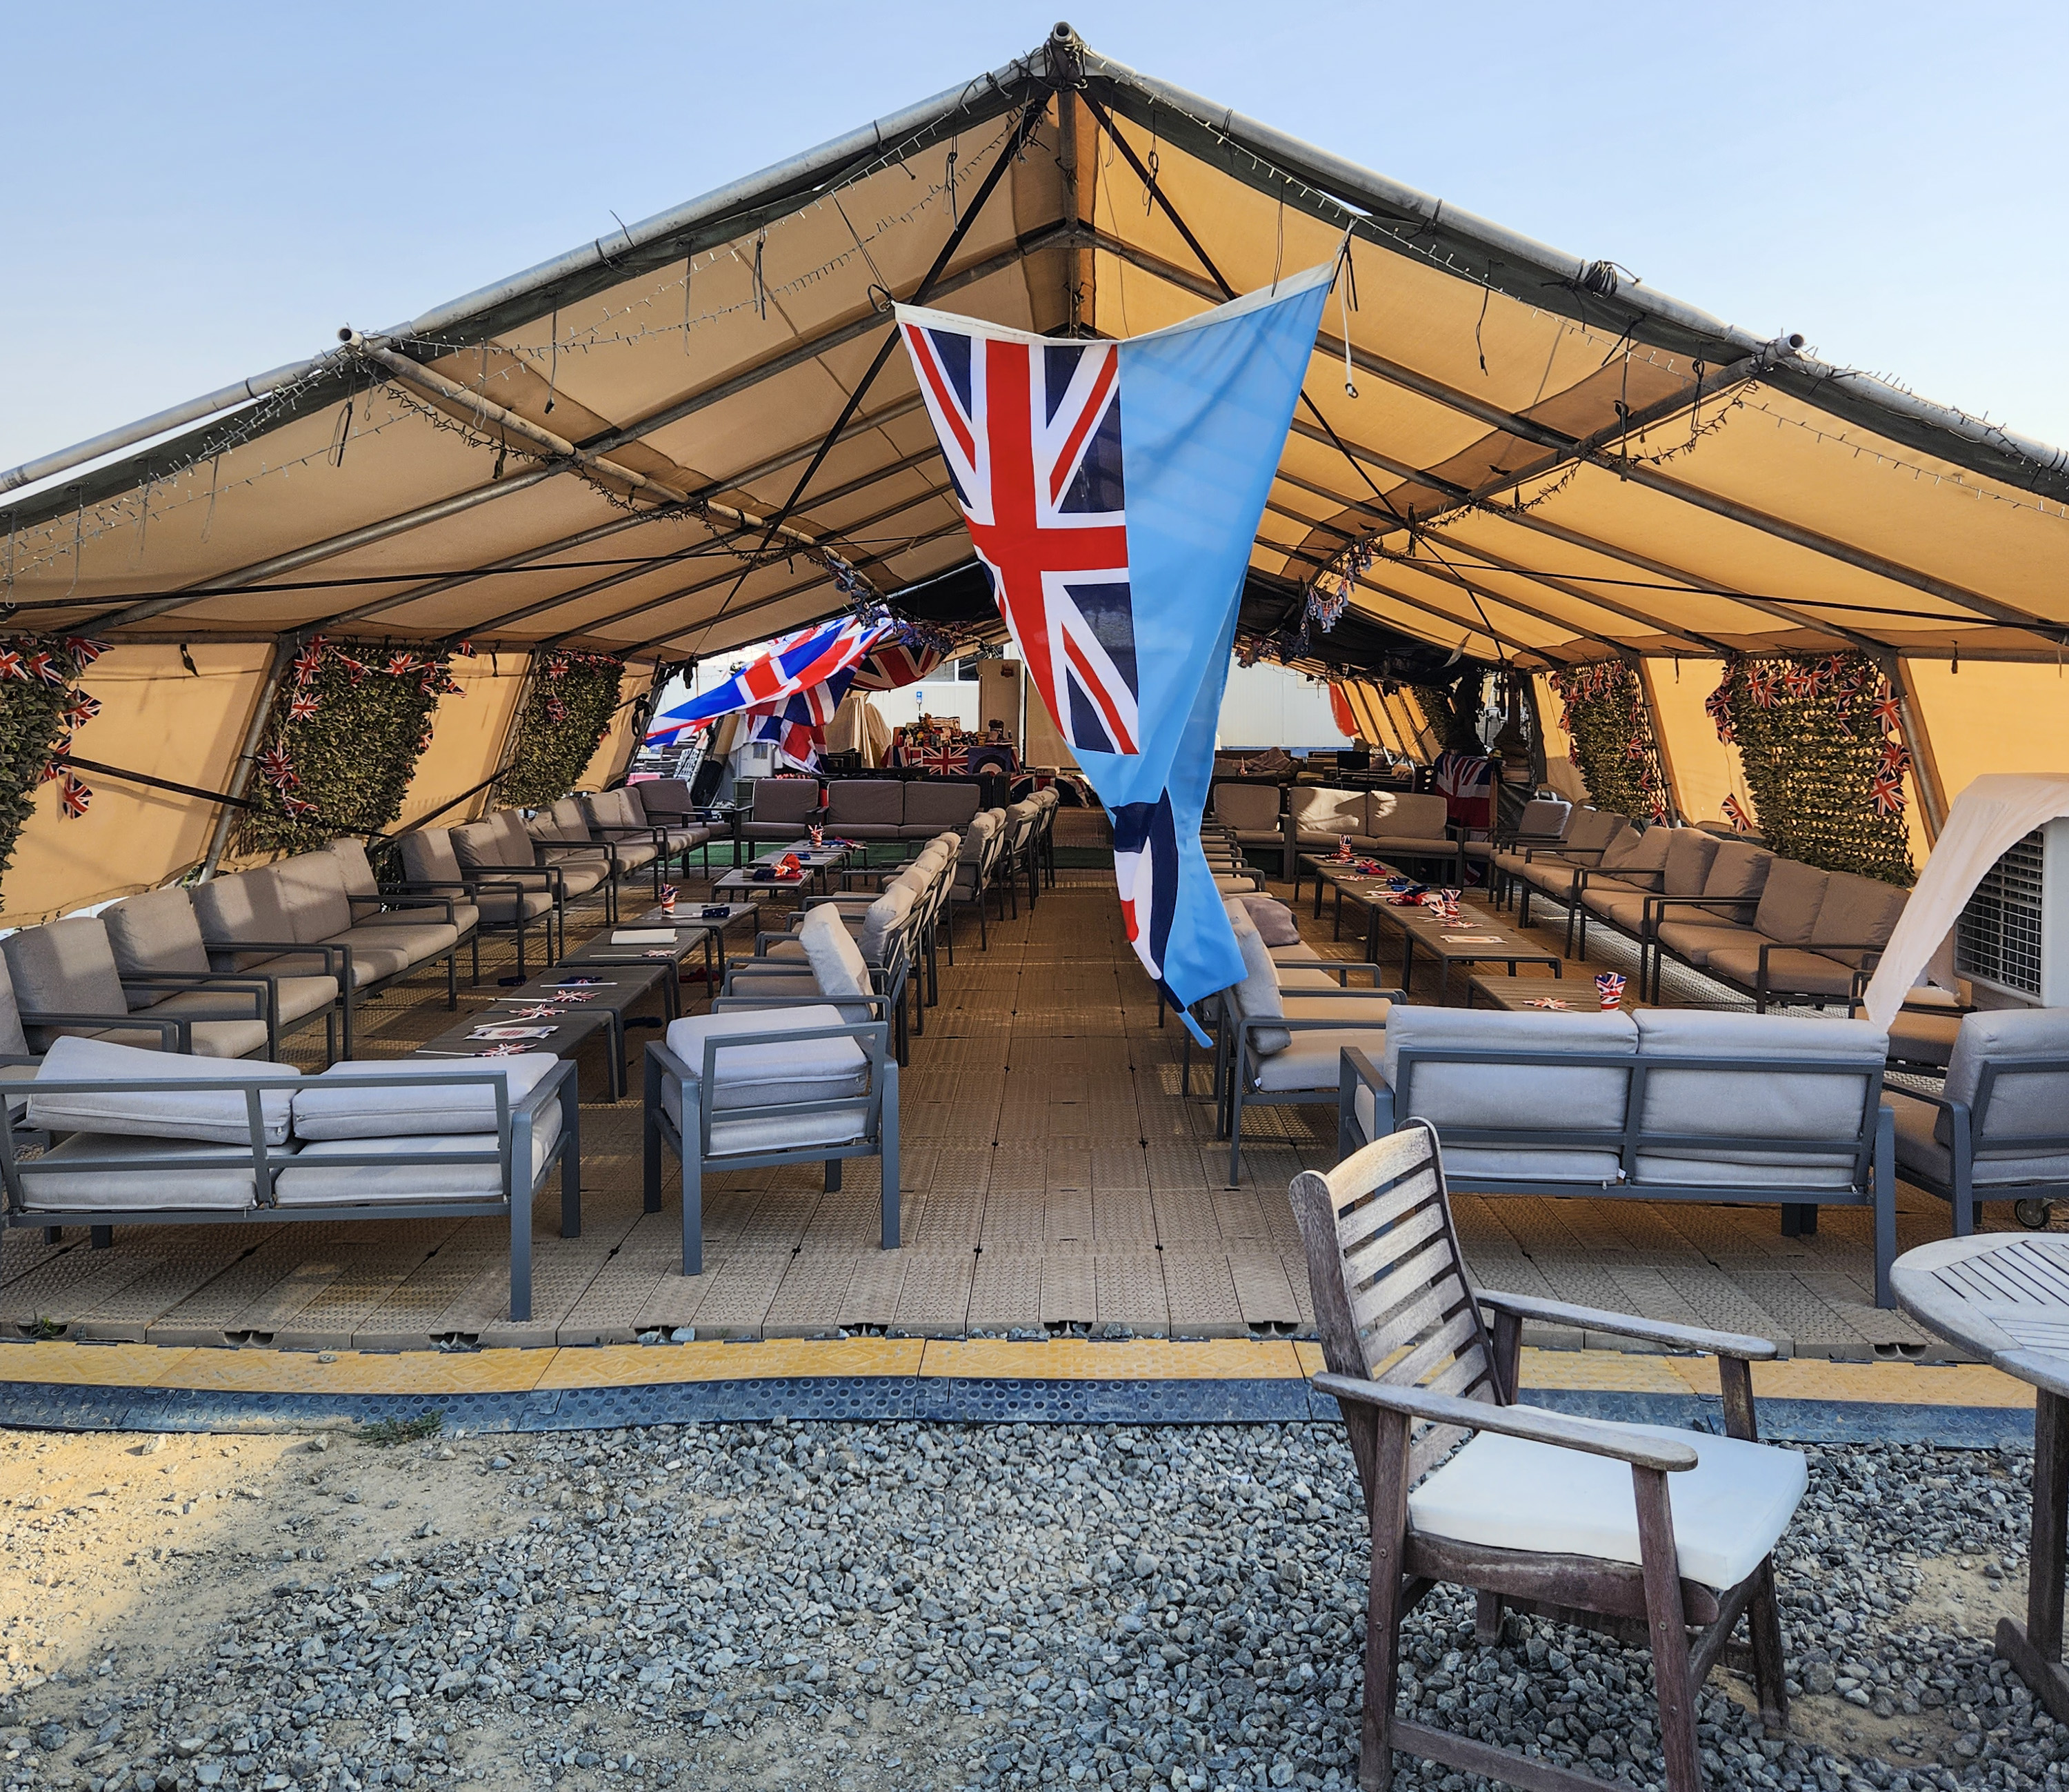 Image shows temporary tent with chairs and flag.